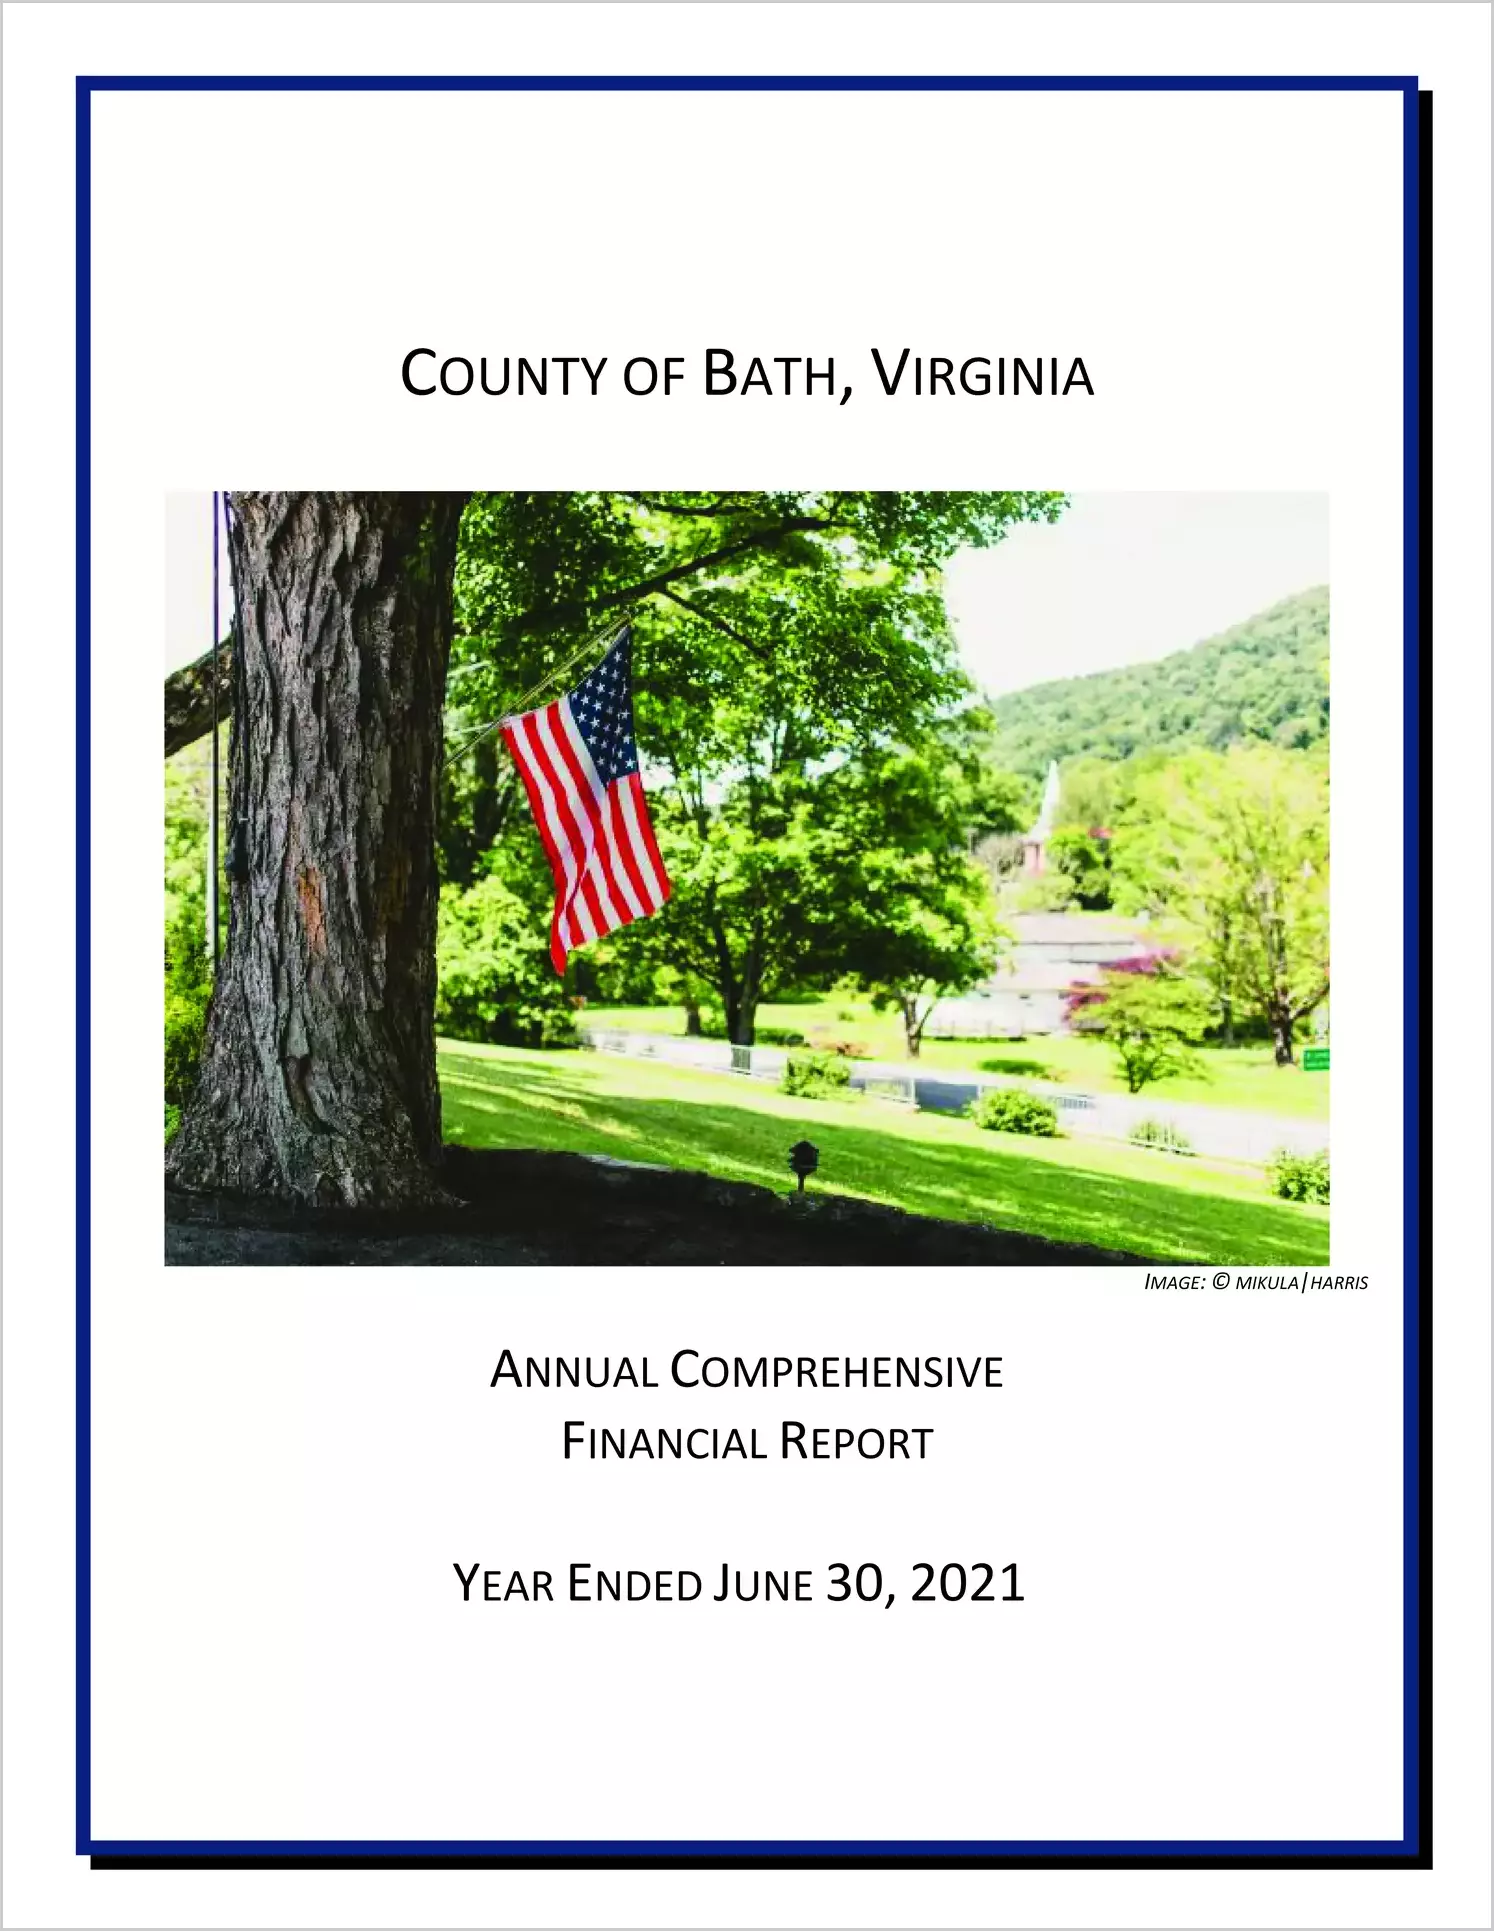 2021 Annual Financial Report for County of Bath